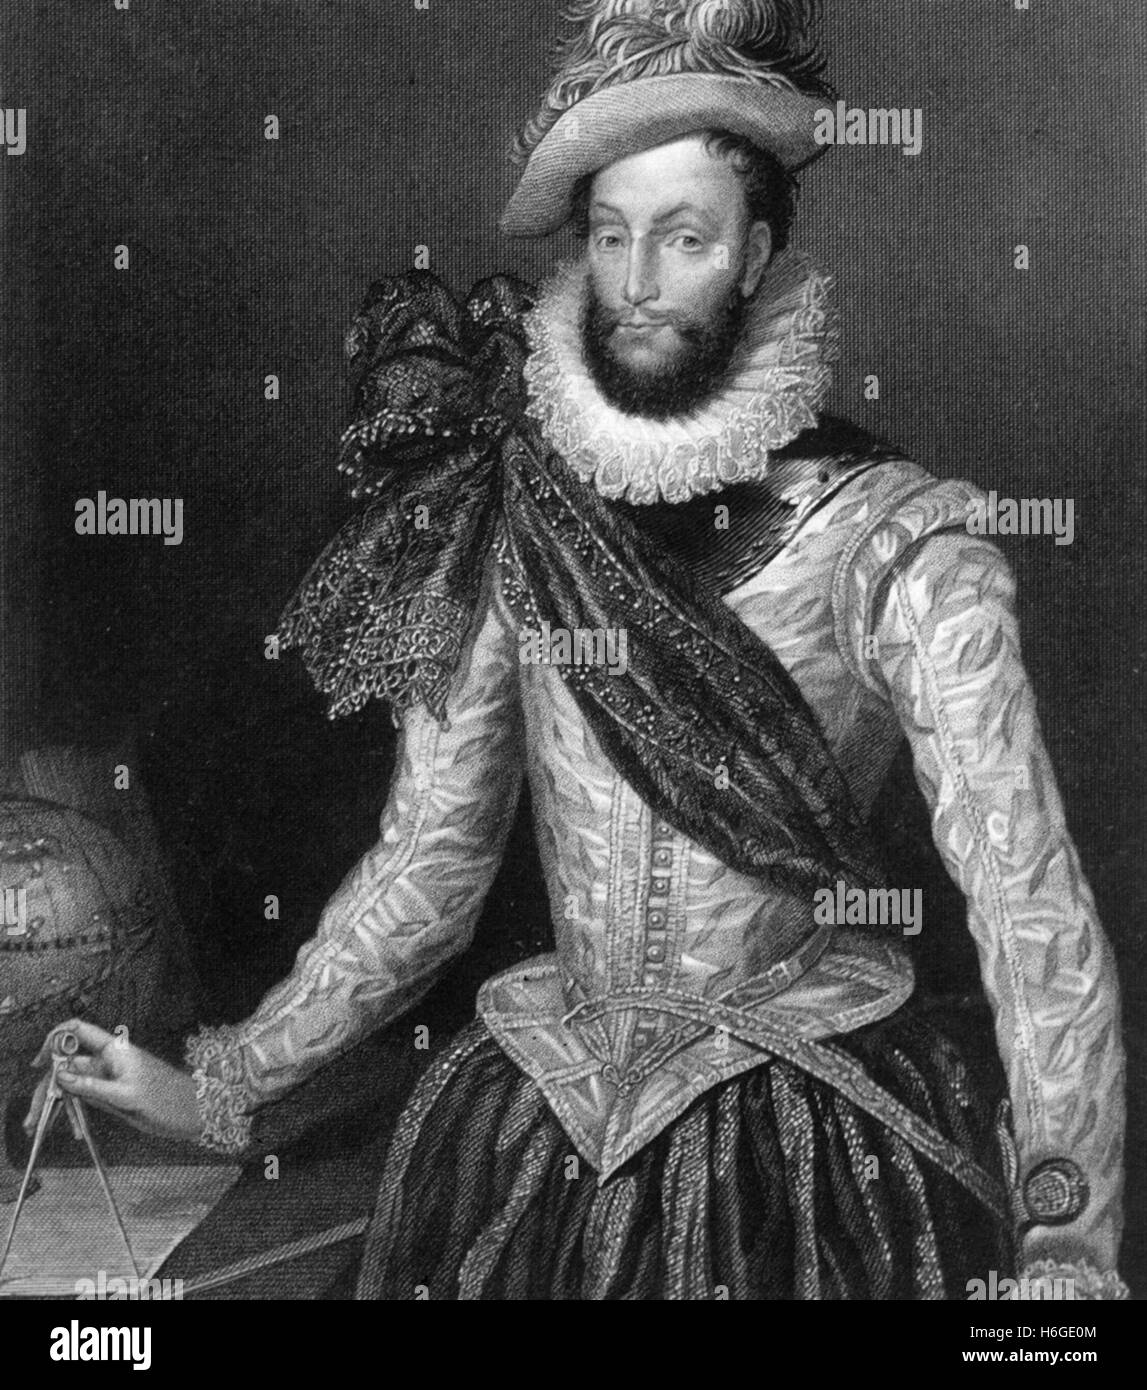 WALTER RALEIGH (c 1554-1618) English explorer, poet, courtier and spy from an 1872 engraving based on  contemporary paintings Stock Photo